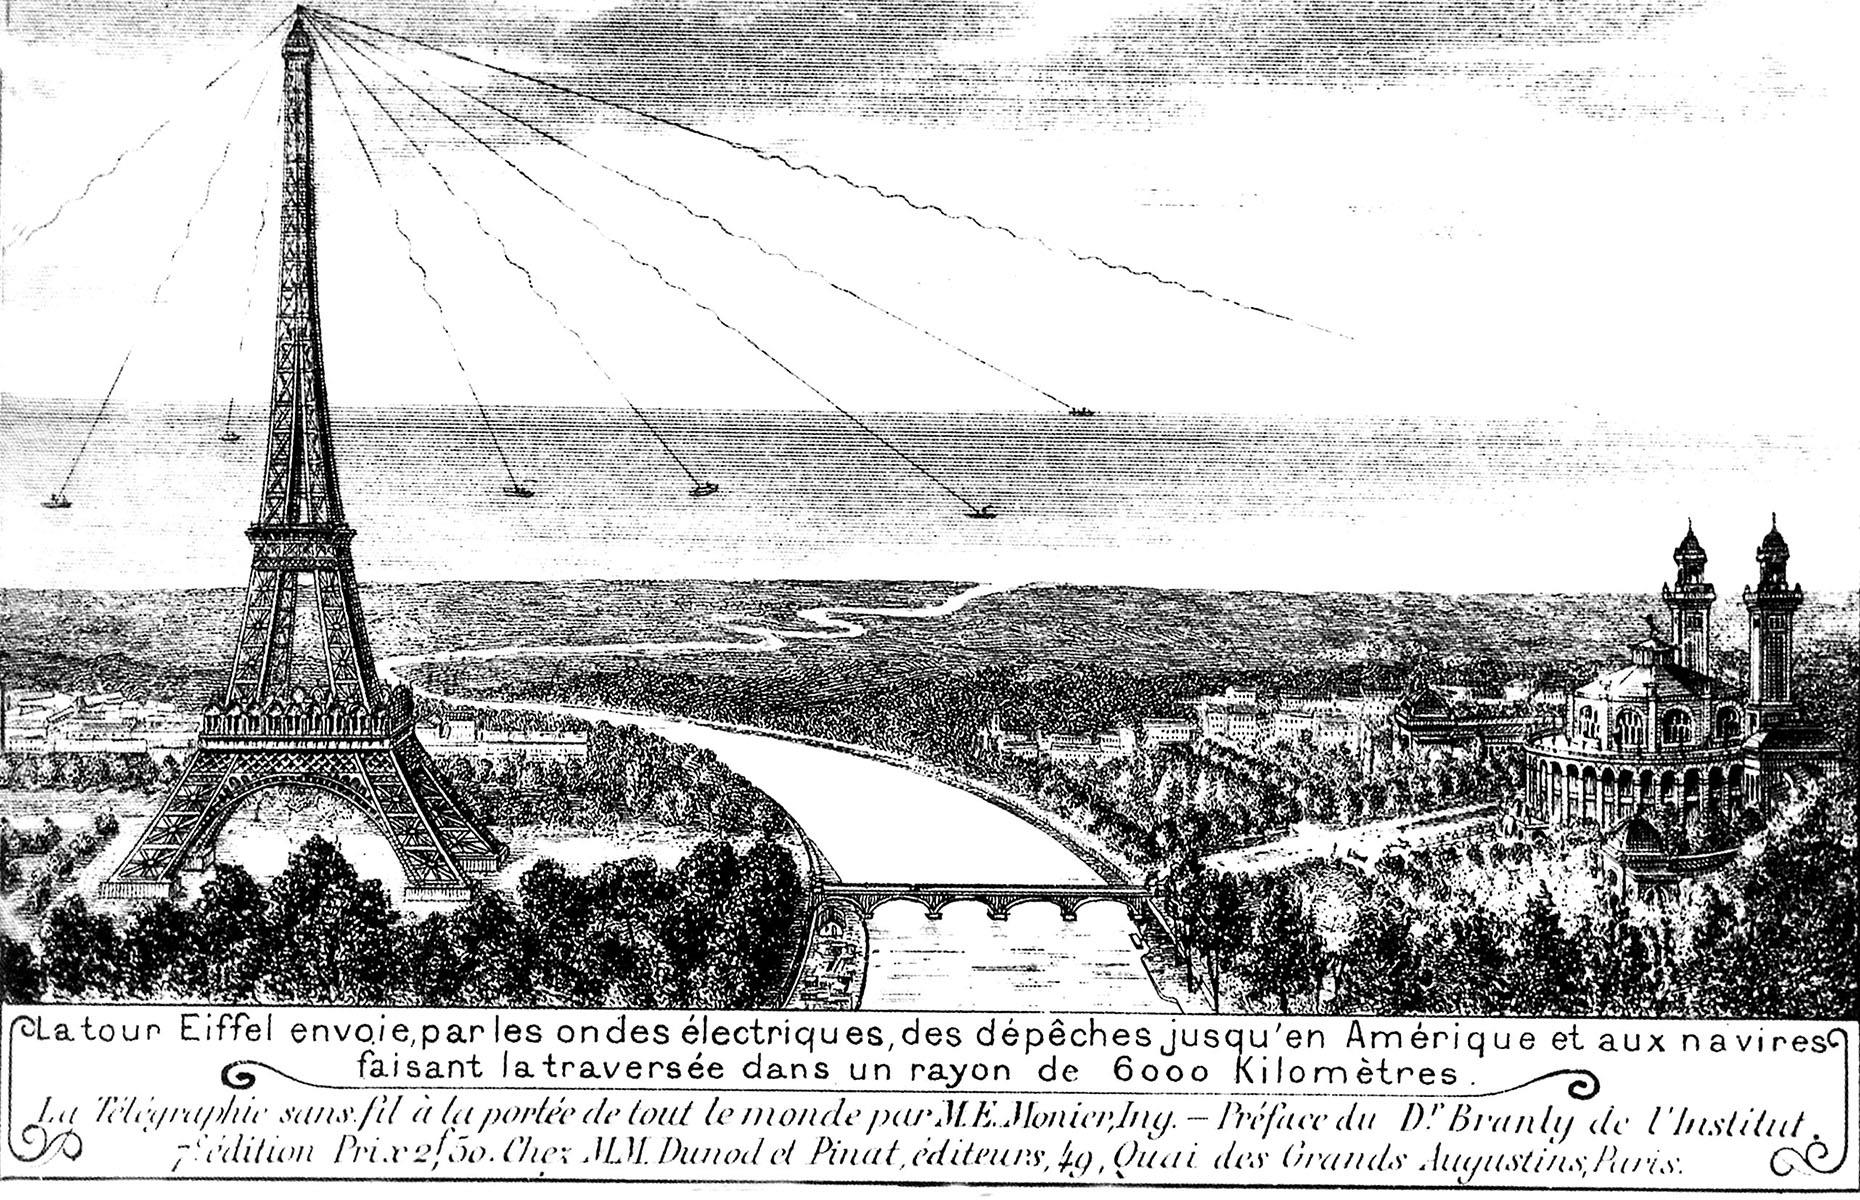 <p>In the end it was wireless telegraphy that saved the Eiffel Tower from being dismantled. First conceived in the 1890s, this nascent technology developed rapidly and in 1898 Eugene Ducretet established the very first radio contact in Morse code between the Eiffel Tower and the Pantheon, 2.5 miles away. A transmitting station was installed, enabling radio transmission with London, and by 1908 transmissions were reaching distances of 3,728 miles. A strategic purpose had been found for the Eiffel Tower and a 70-year extension added to the original permit.</p>